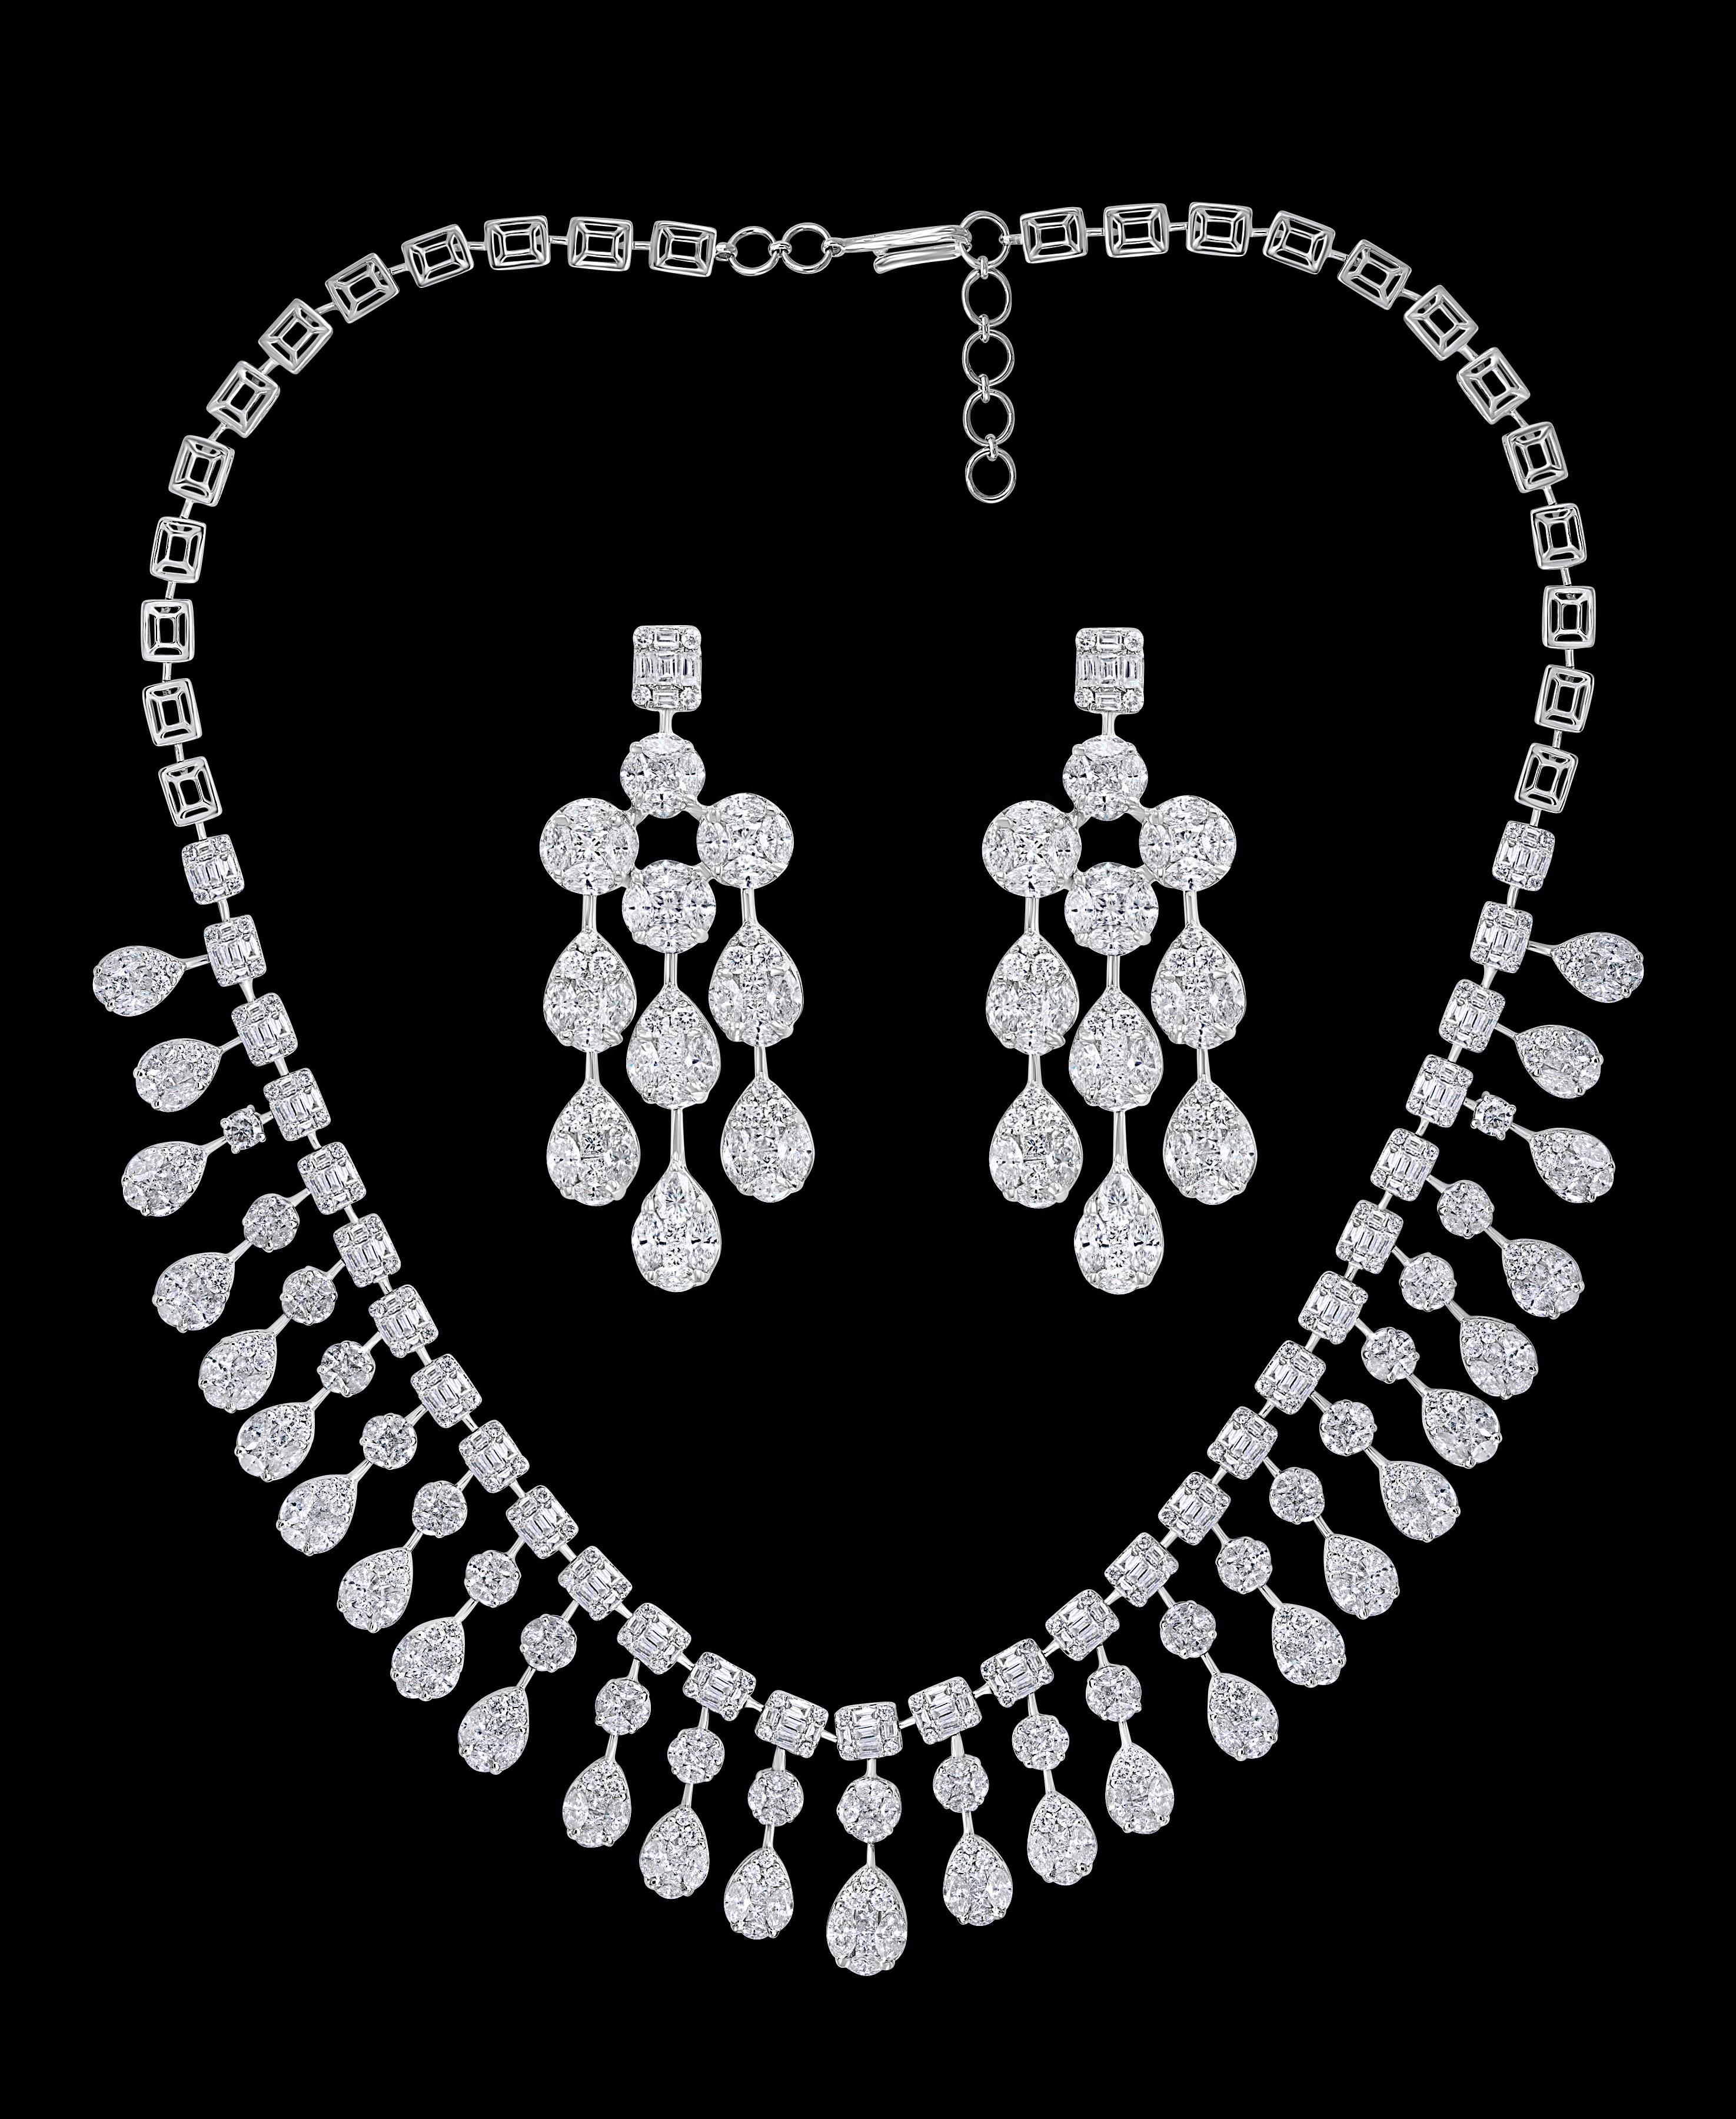 An Elegant Dangling  32 Carat Diamond  Necklace & Earring Suite in 18 Karat Gold

One of our premium necklace from our Bridal collection.
32 carats of VS quality of Diamonds all mounted in 18 Karat white gold . Weight of the gold  is 67 grams. Round